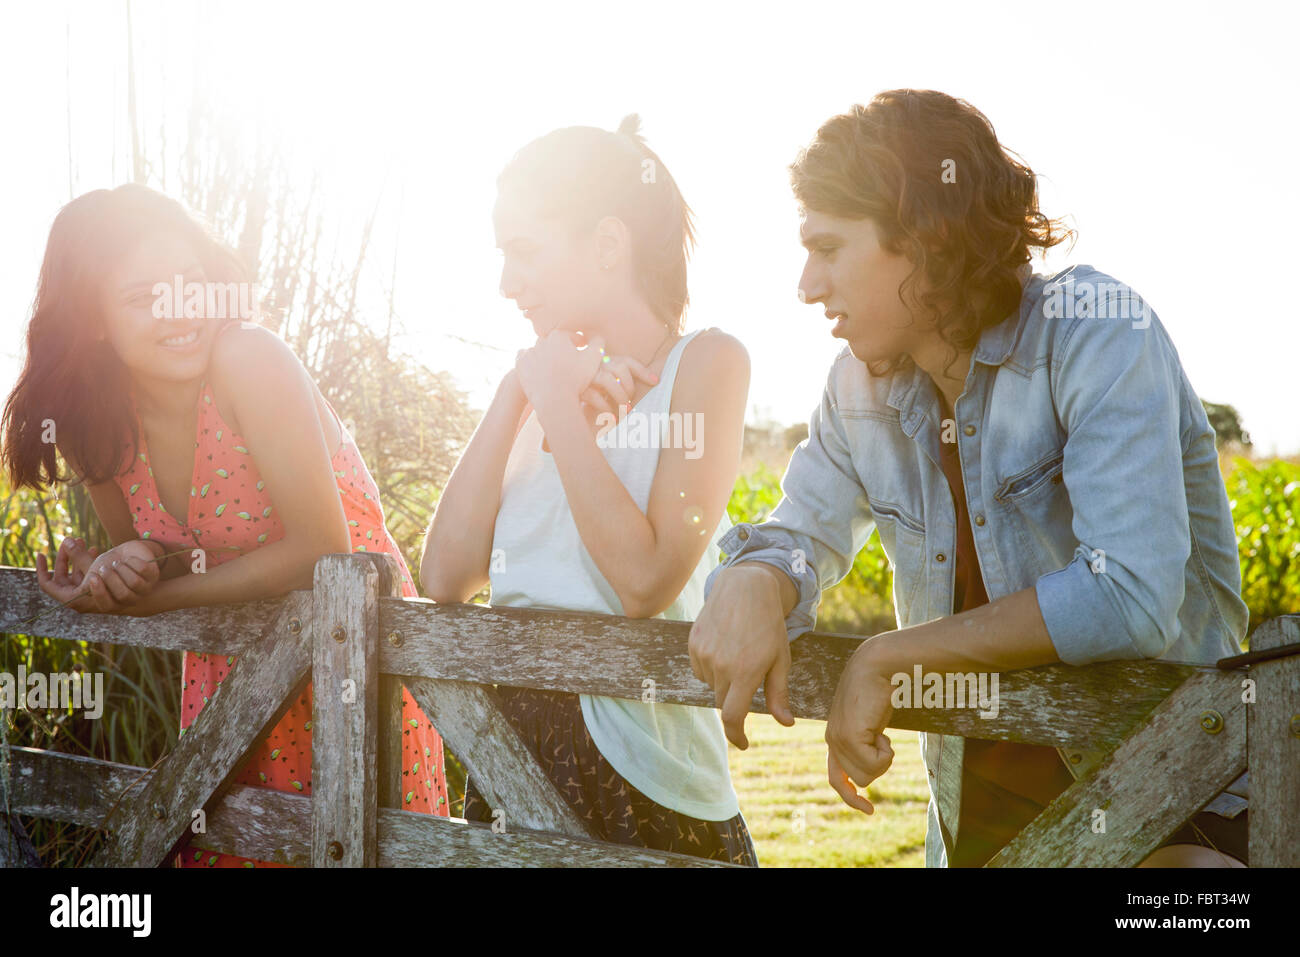 Friends spending weekend together outdoors Stock Photo